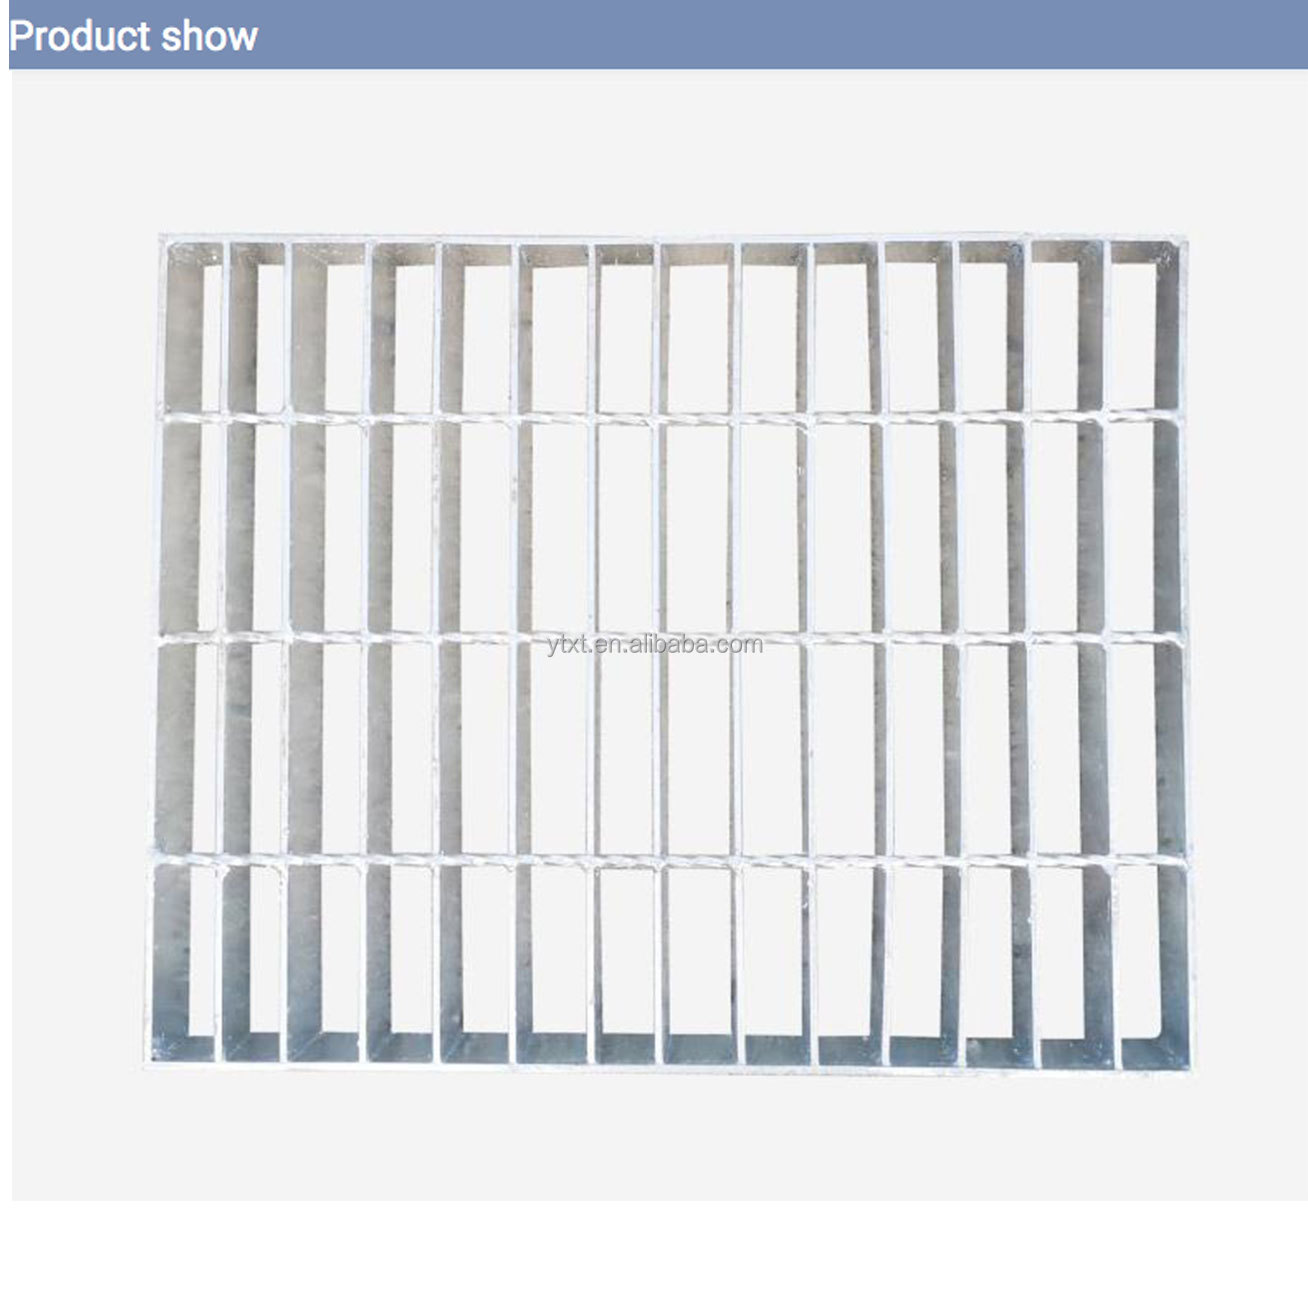 High quality casting stainless galvanized serrated 30x5 32x5 steel grating mat